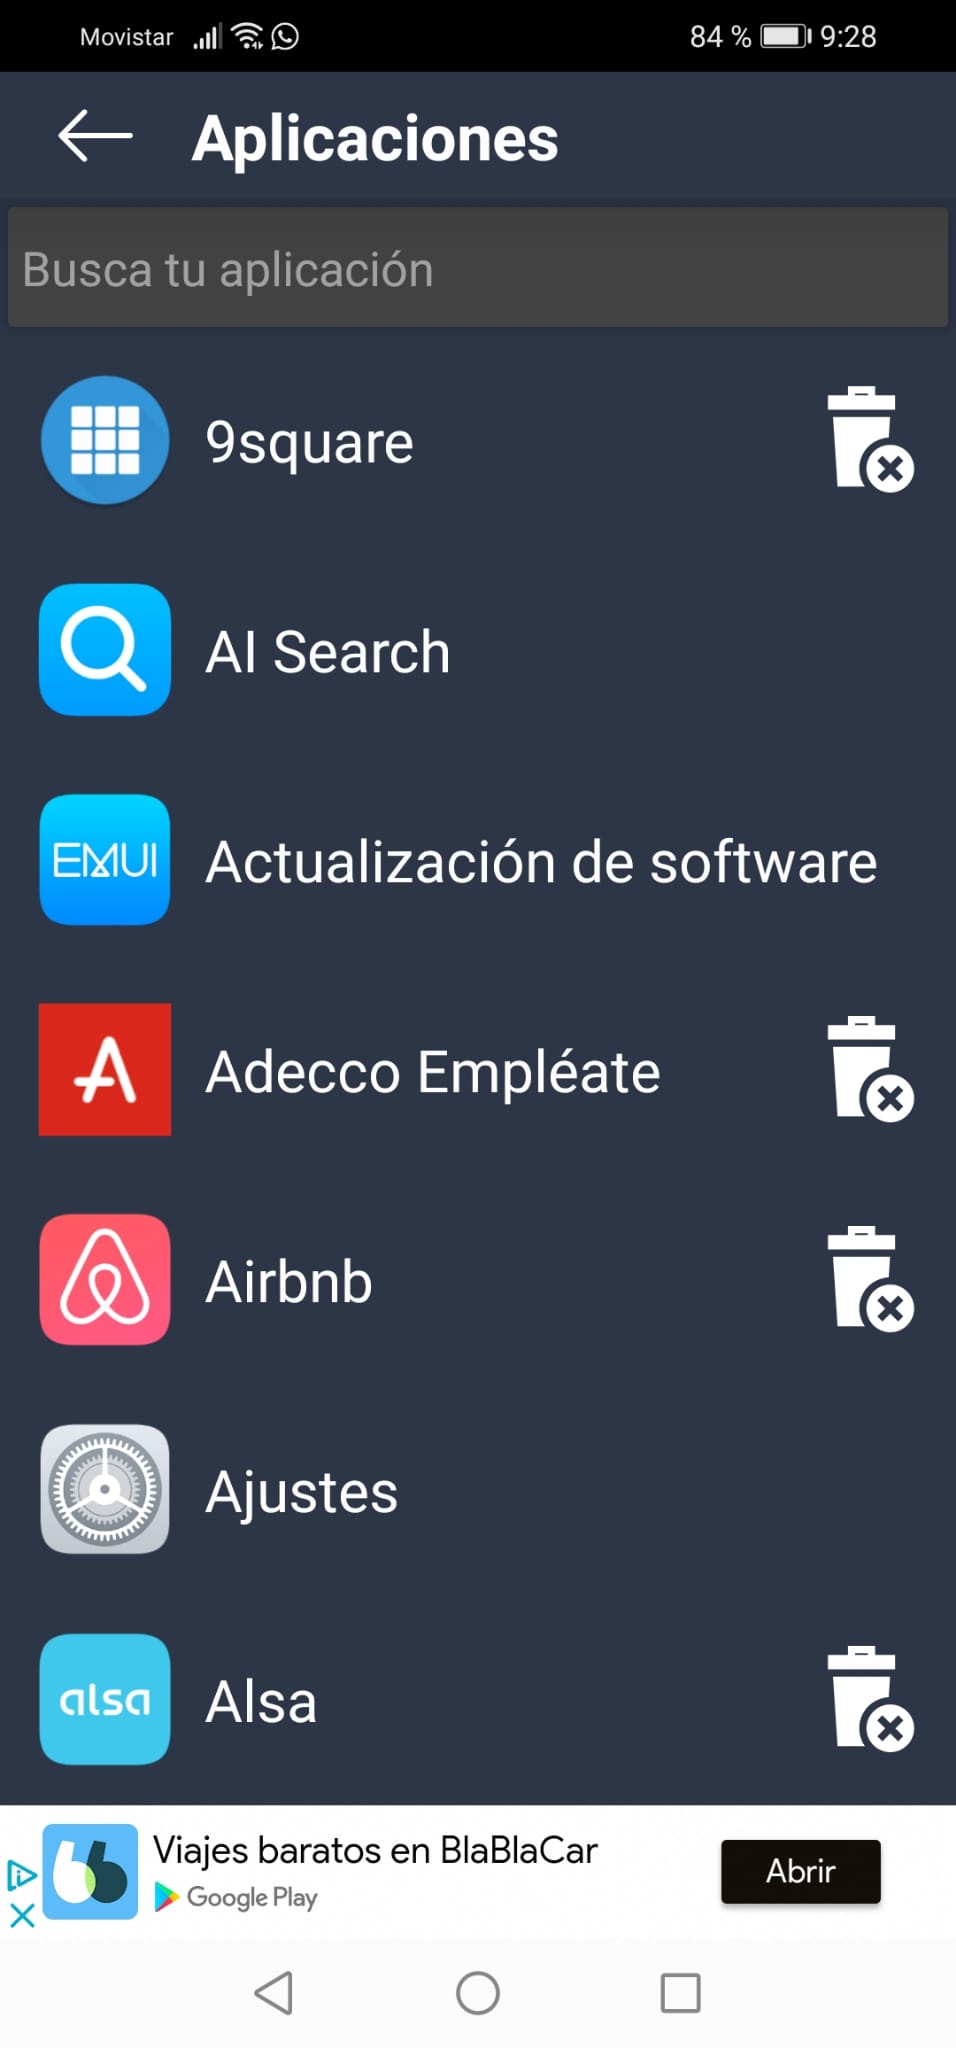 The applications of our device and the option to search or uninstall a particular one are shown.